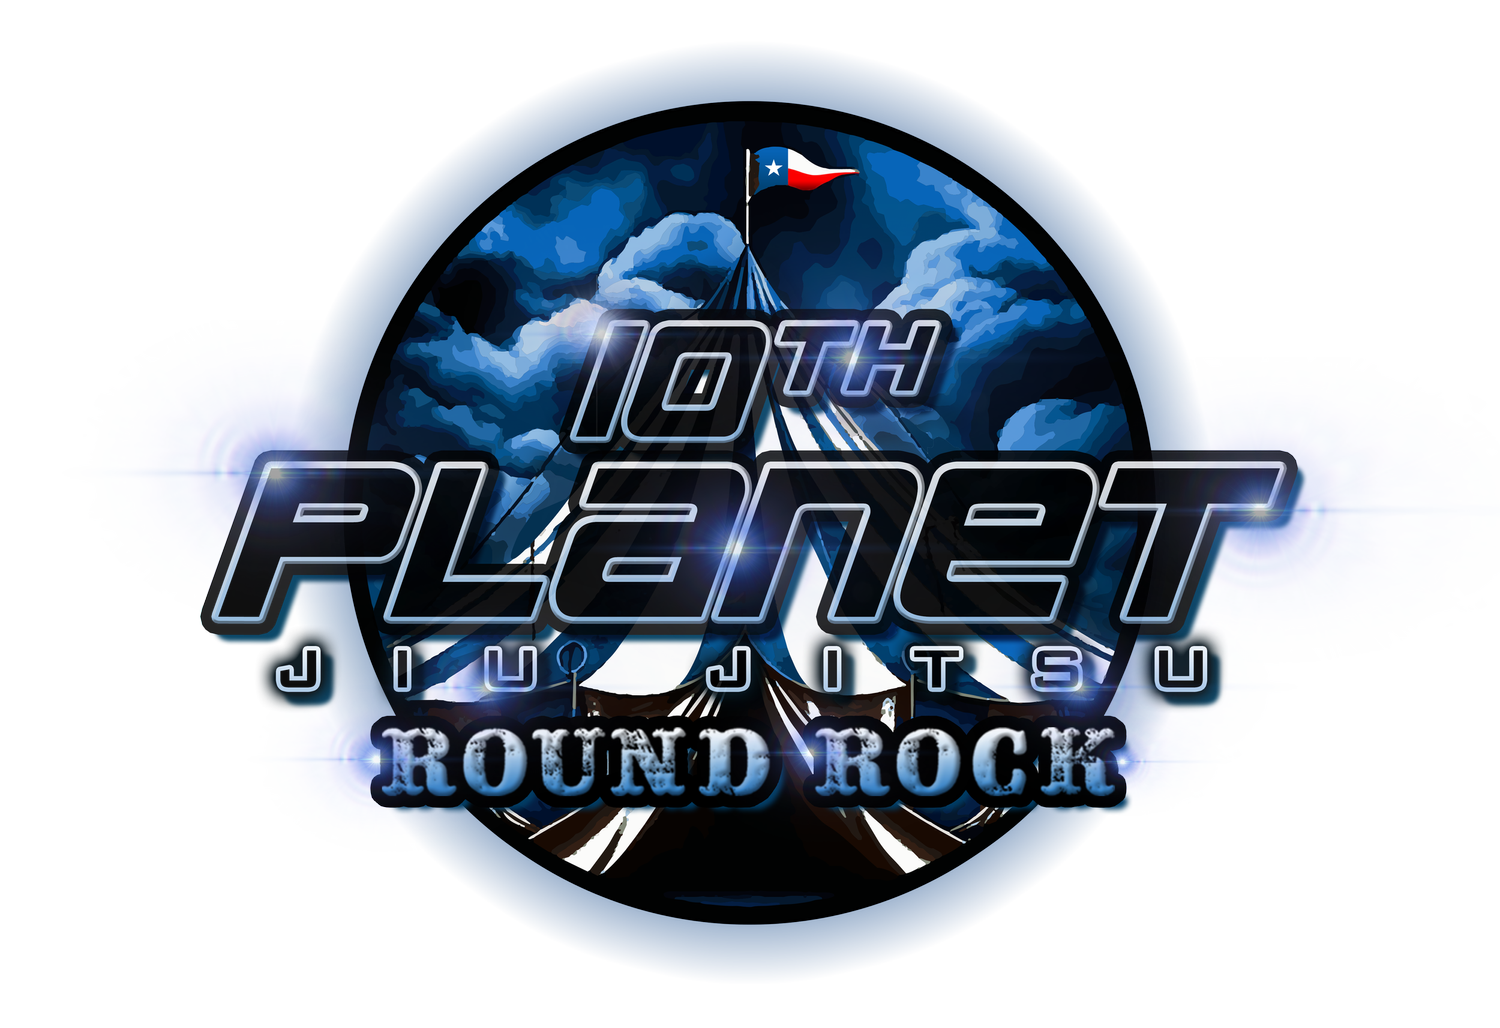 10th Planet Roundrock